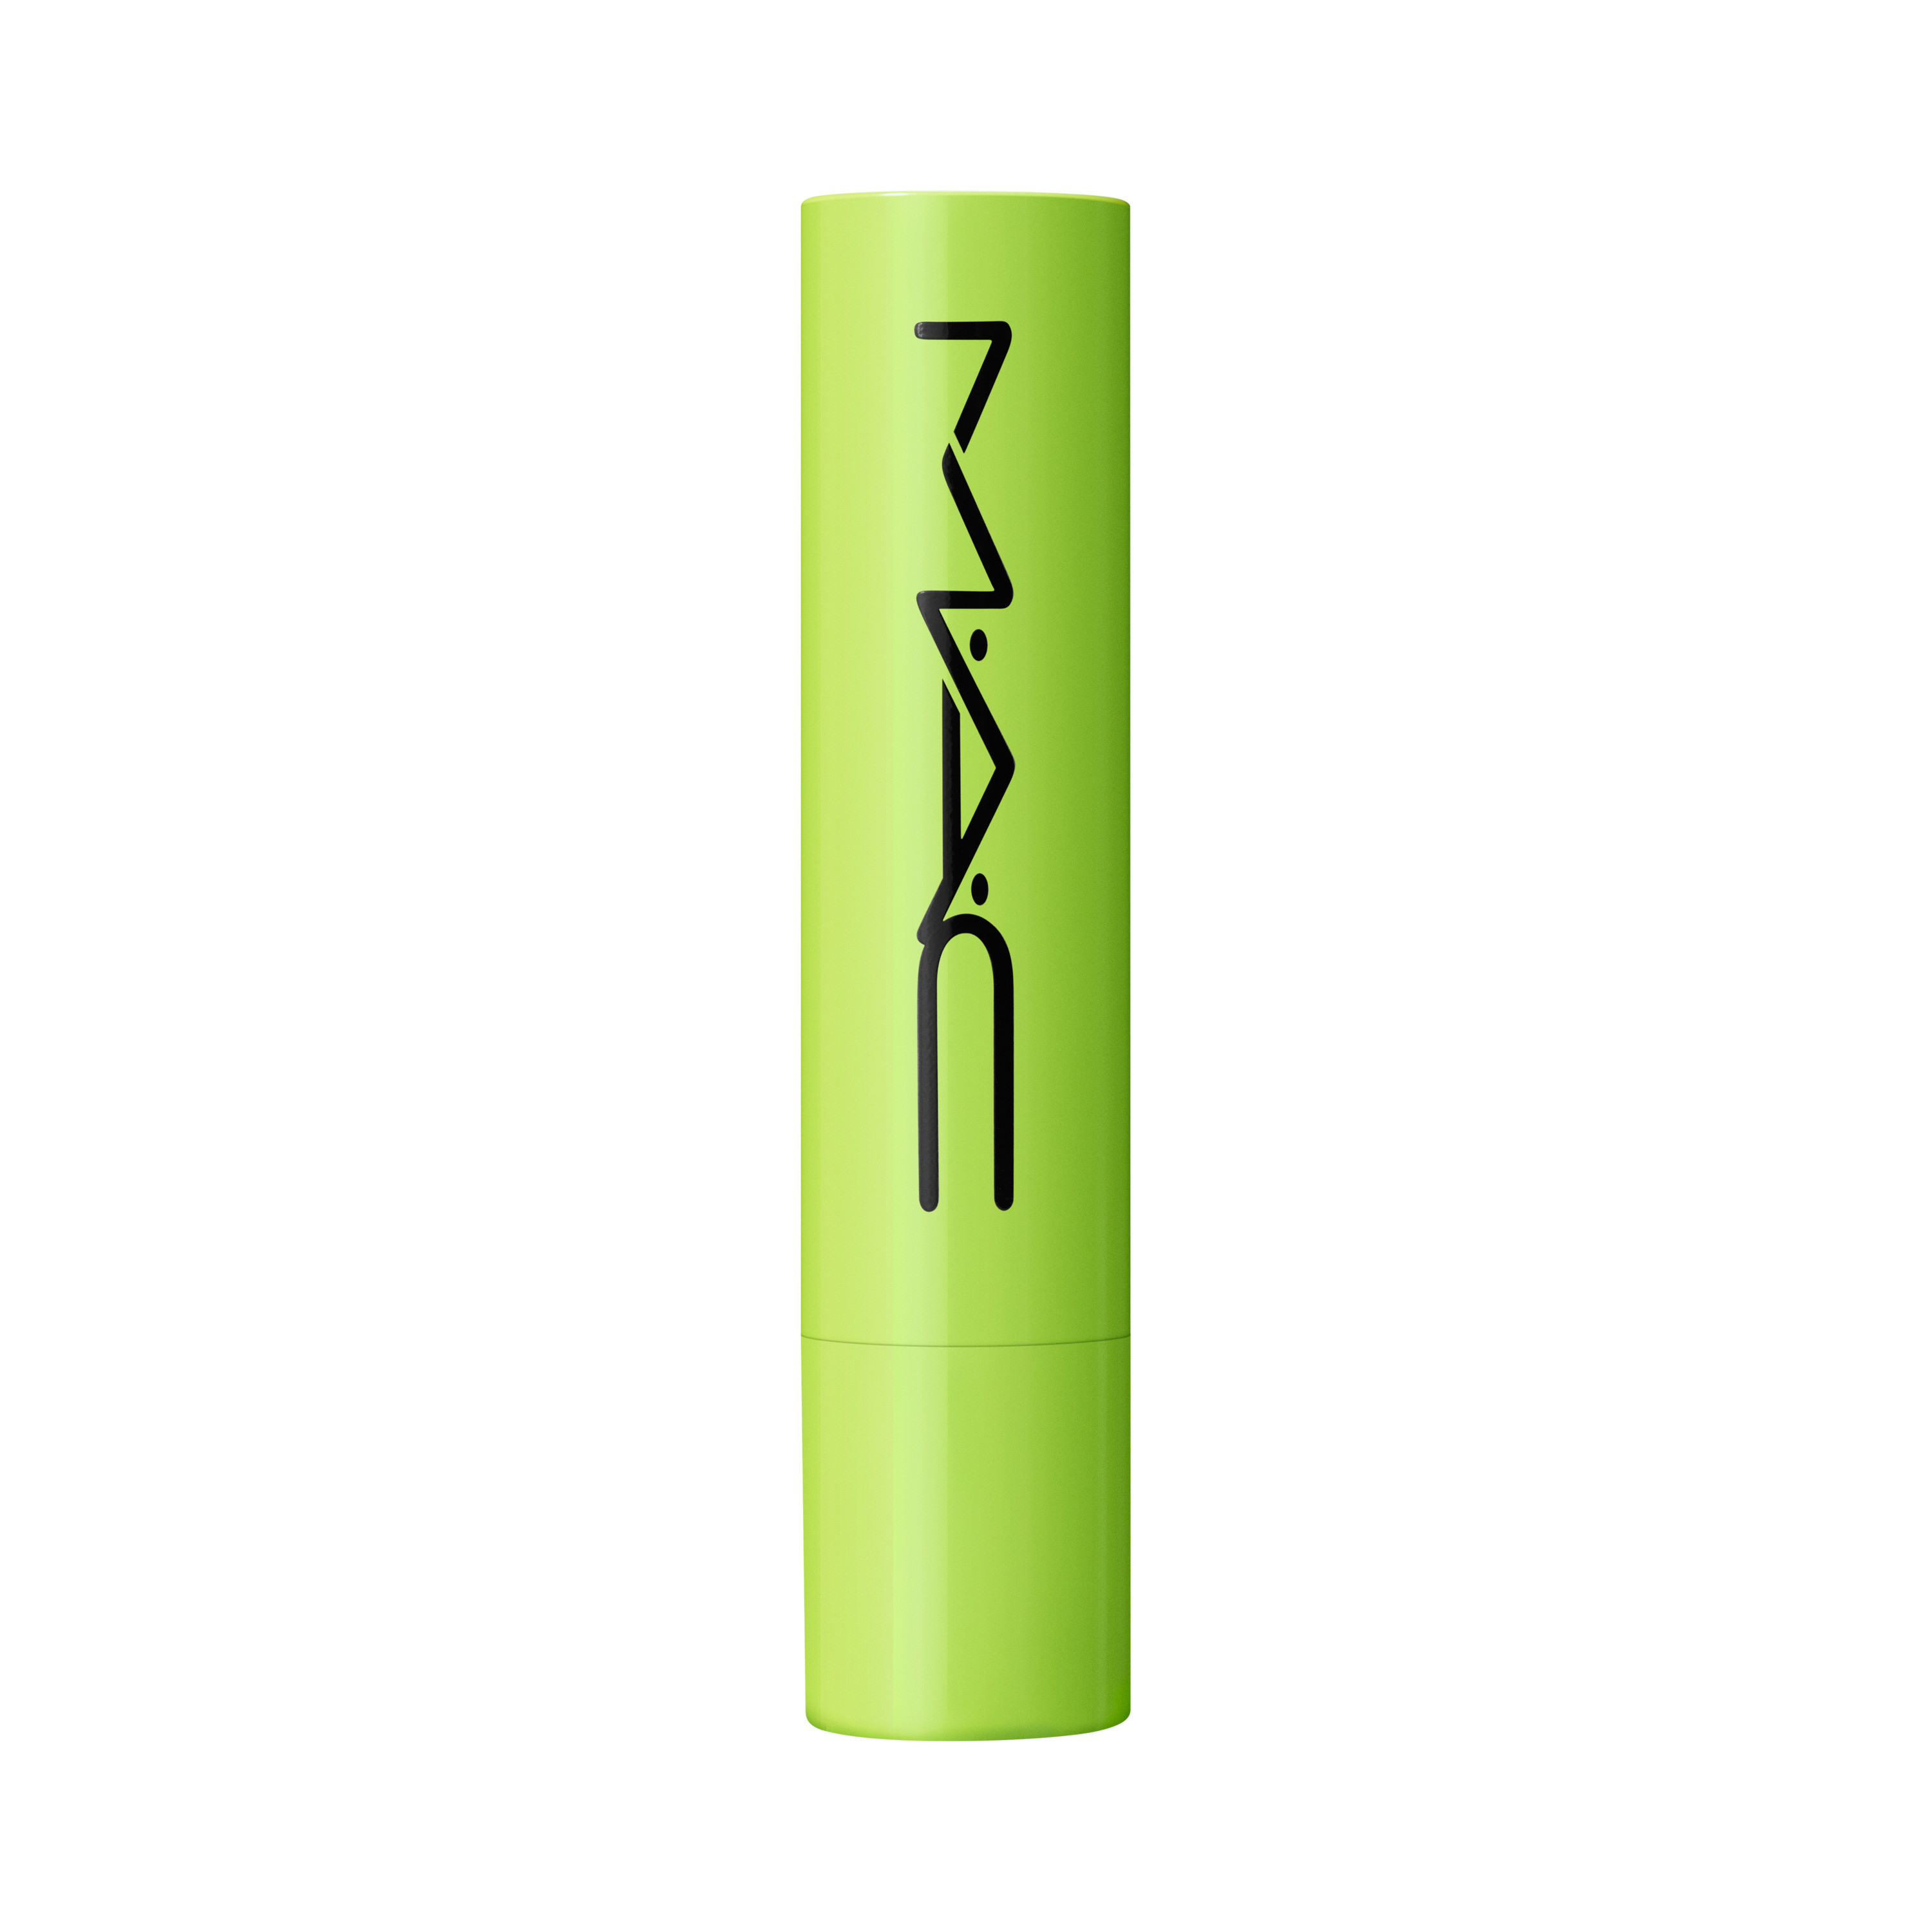 Squirt plumping gloss stick - Like Squirt, Verde, large image number 1